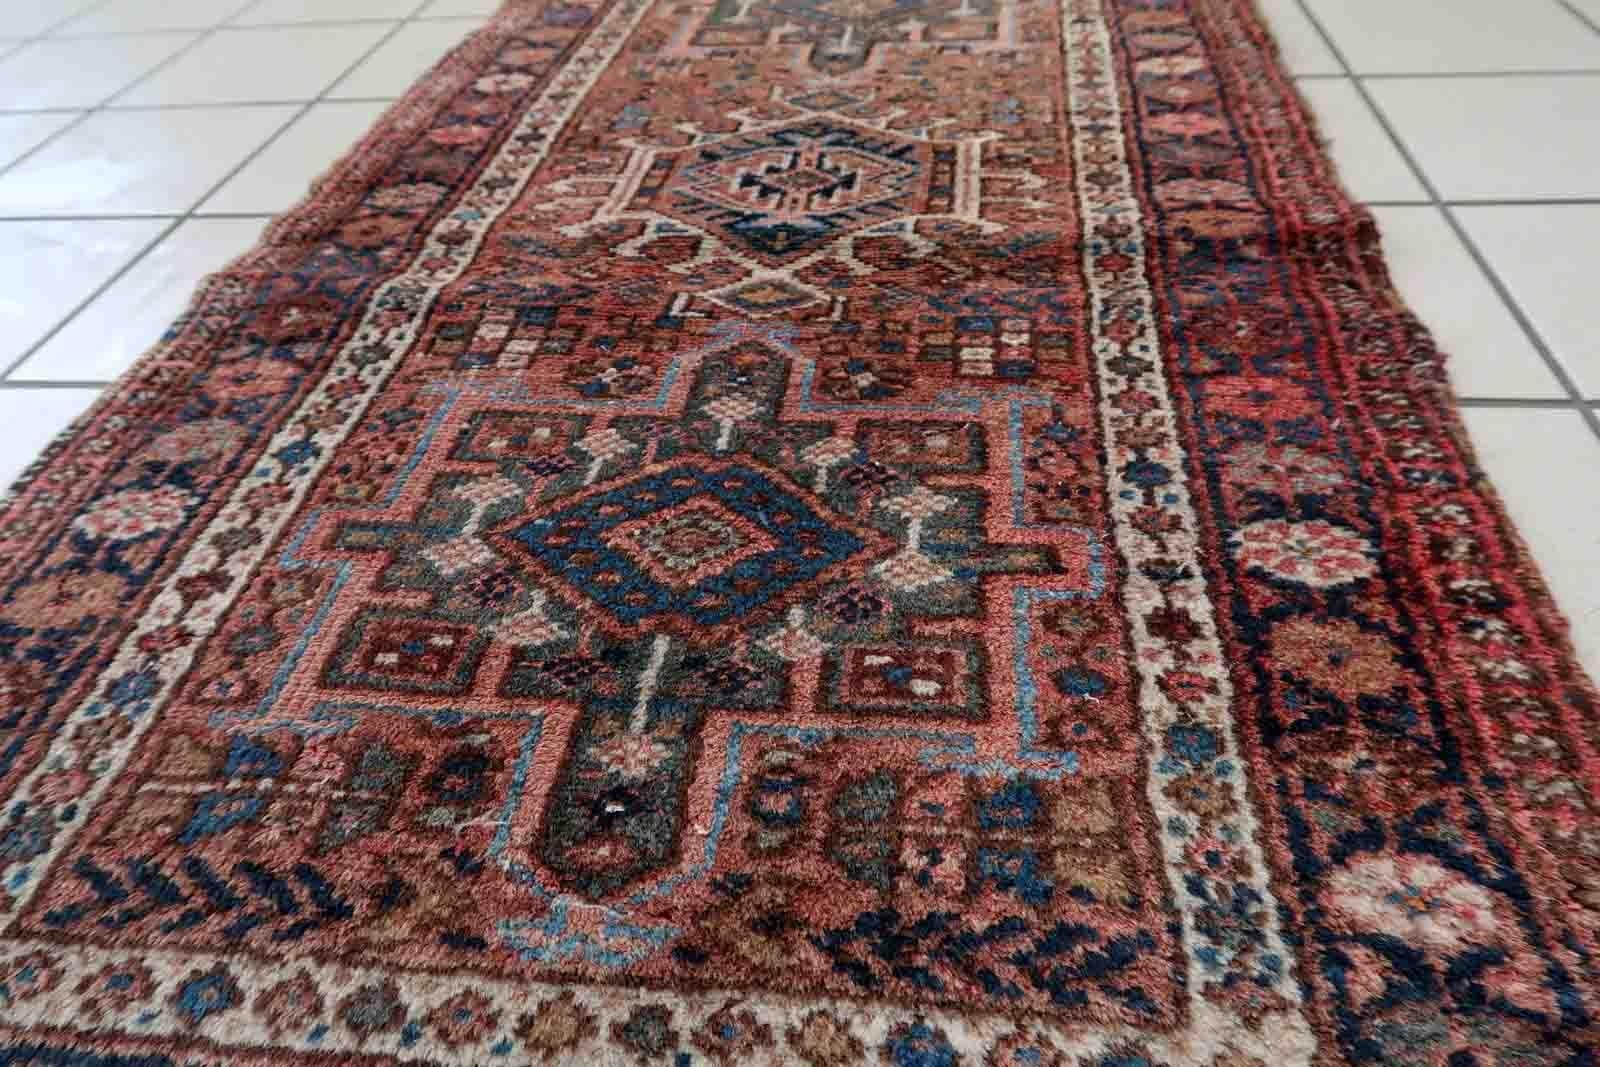 Handmade vintage Karajeh rug in traditional triple medallion design. The rug is in pale red color. It is from the end of 20th century in original good condition.

-condition: original good,

-circa: 1970s,

-size: 2.1' x 3.8' (66cm x